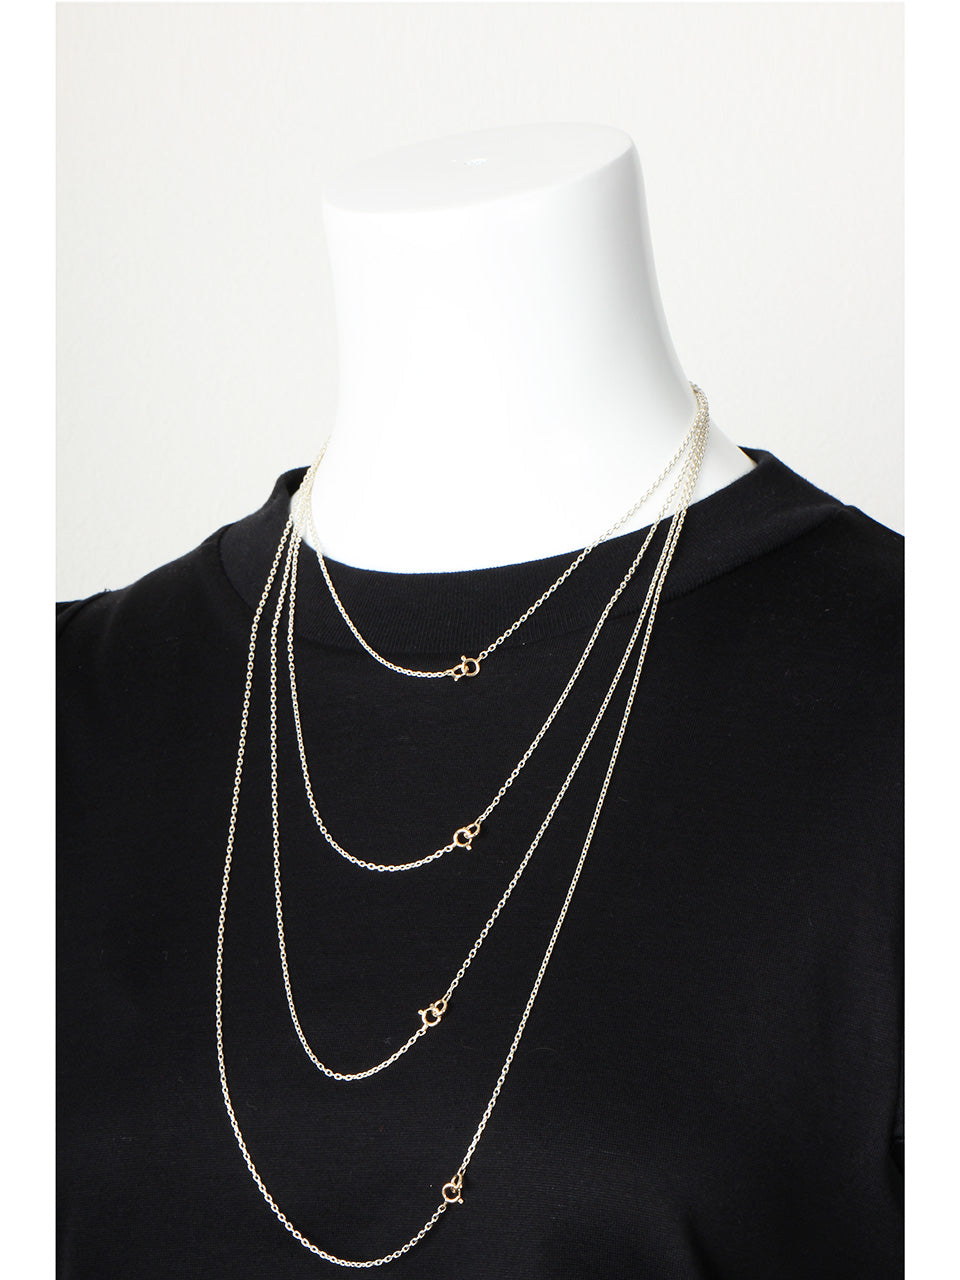 Oval Chain Necklace 40cm